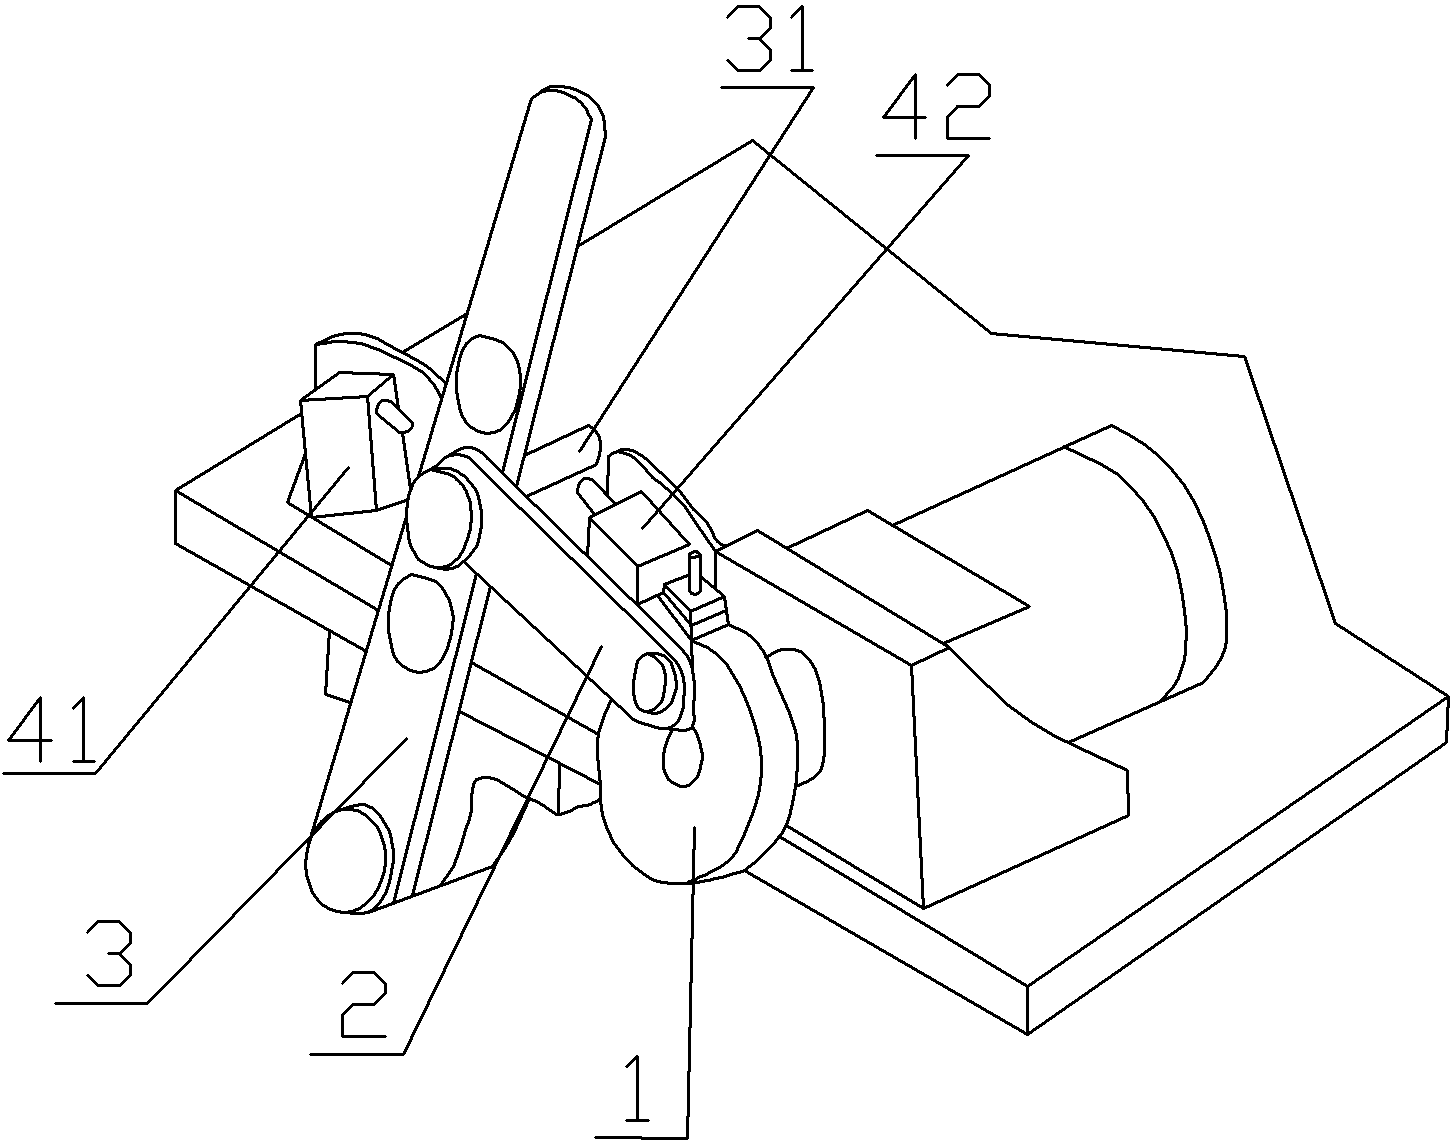 Intermittent feeding device used for lathe